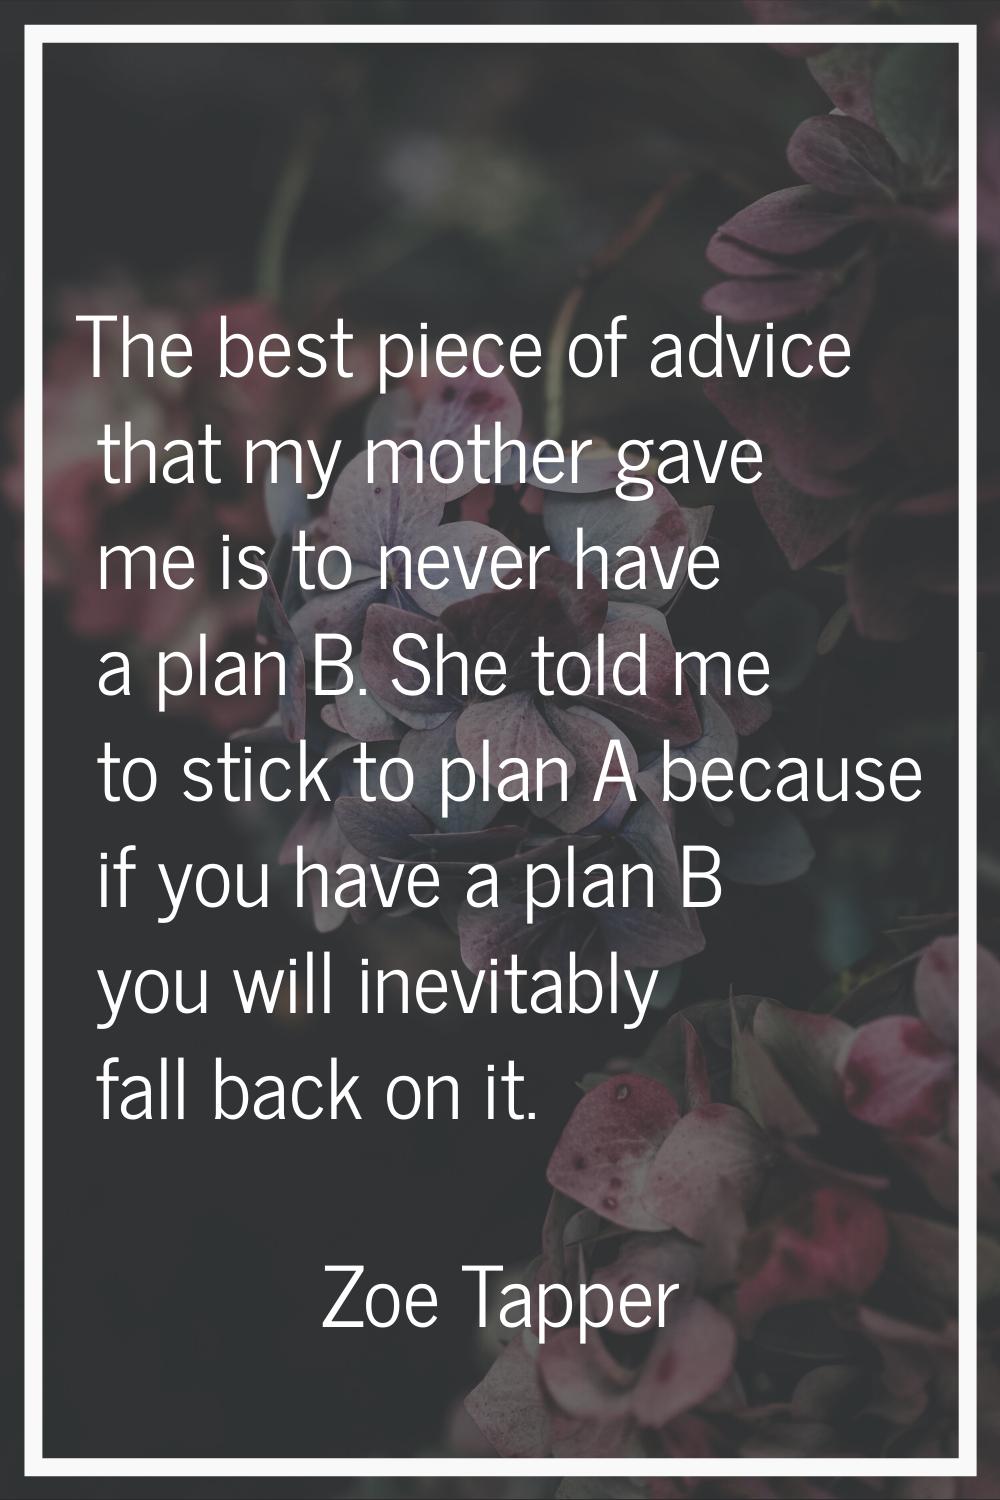 The best piece of advice that my mother gave me is to never have a plan B. She told me to stick to 